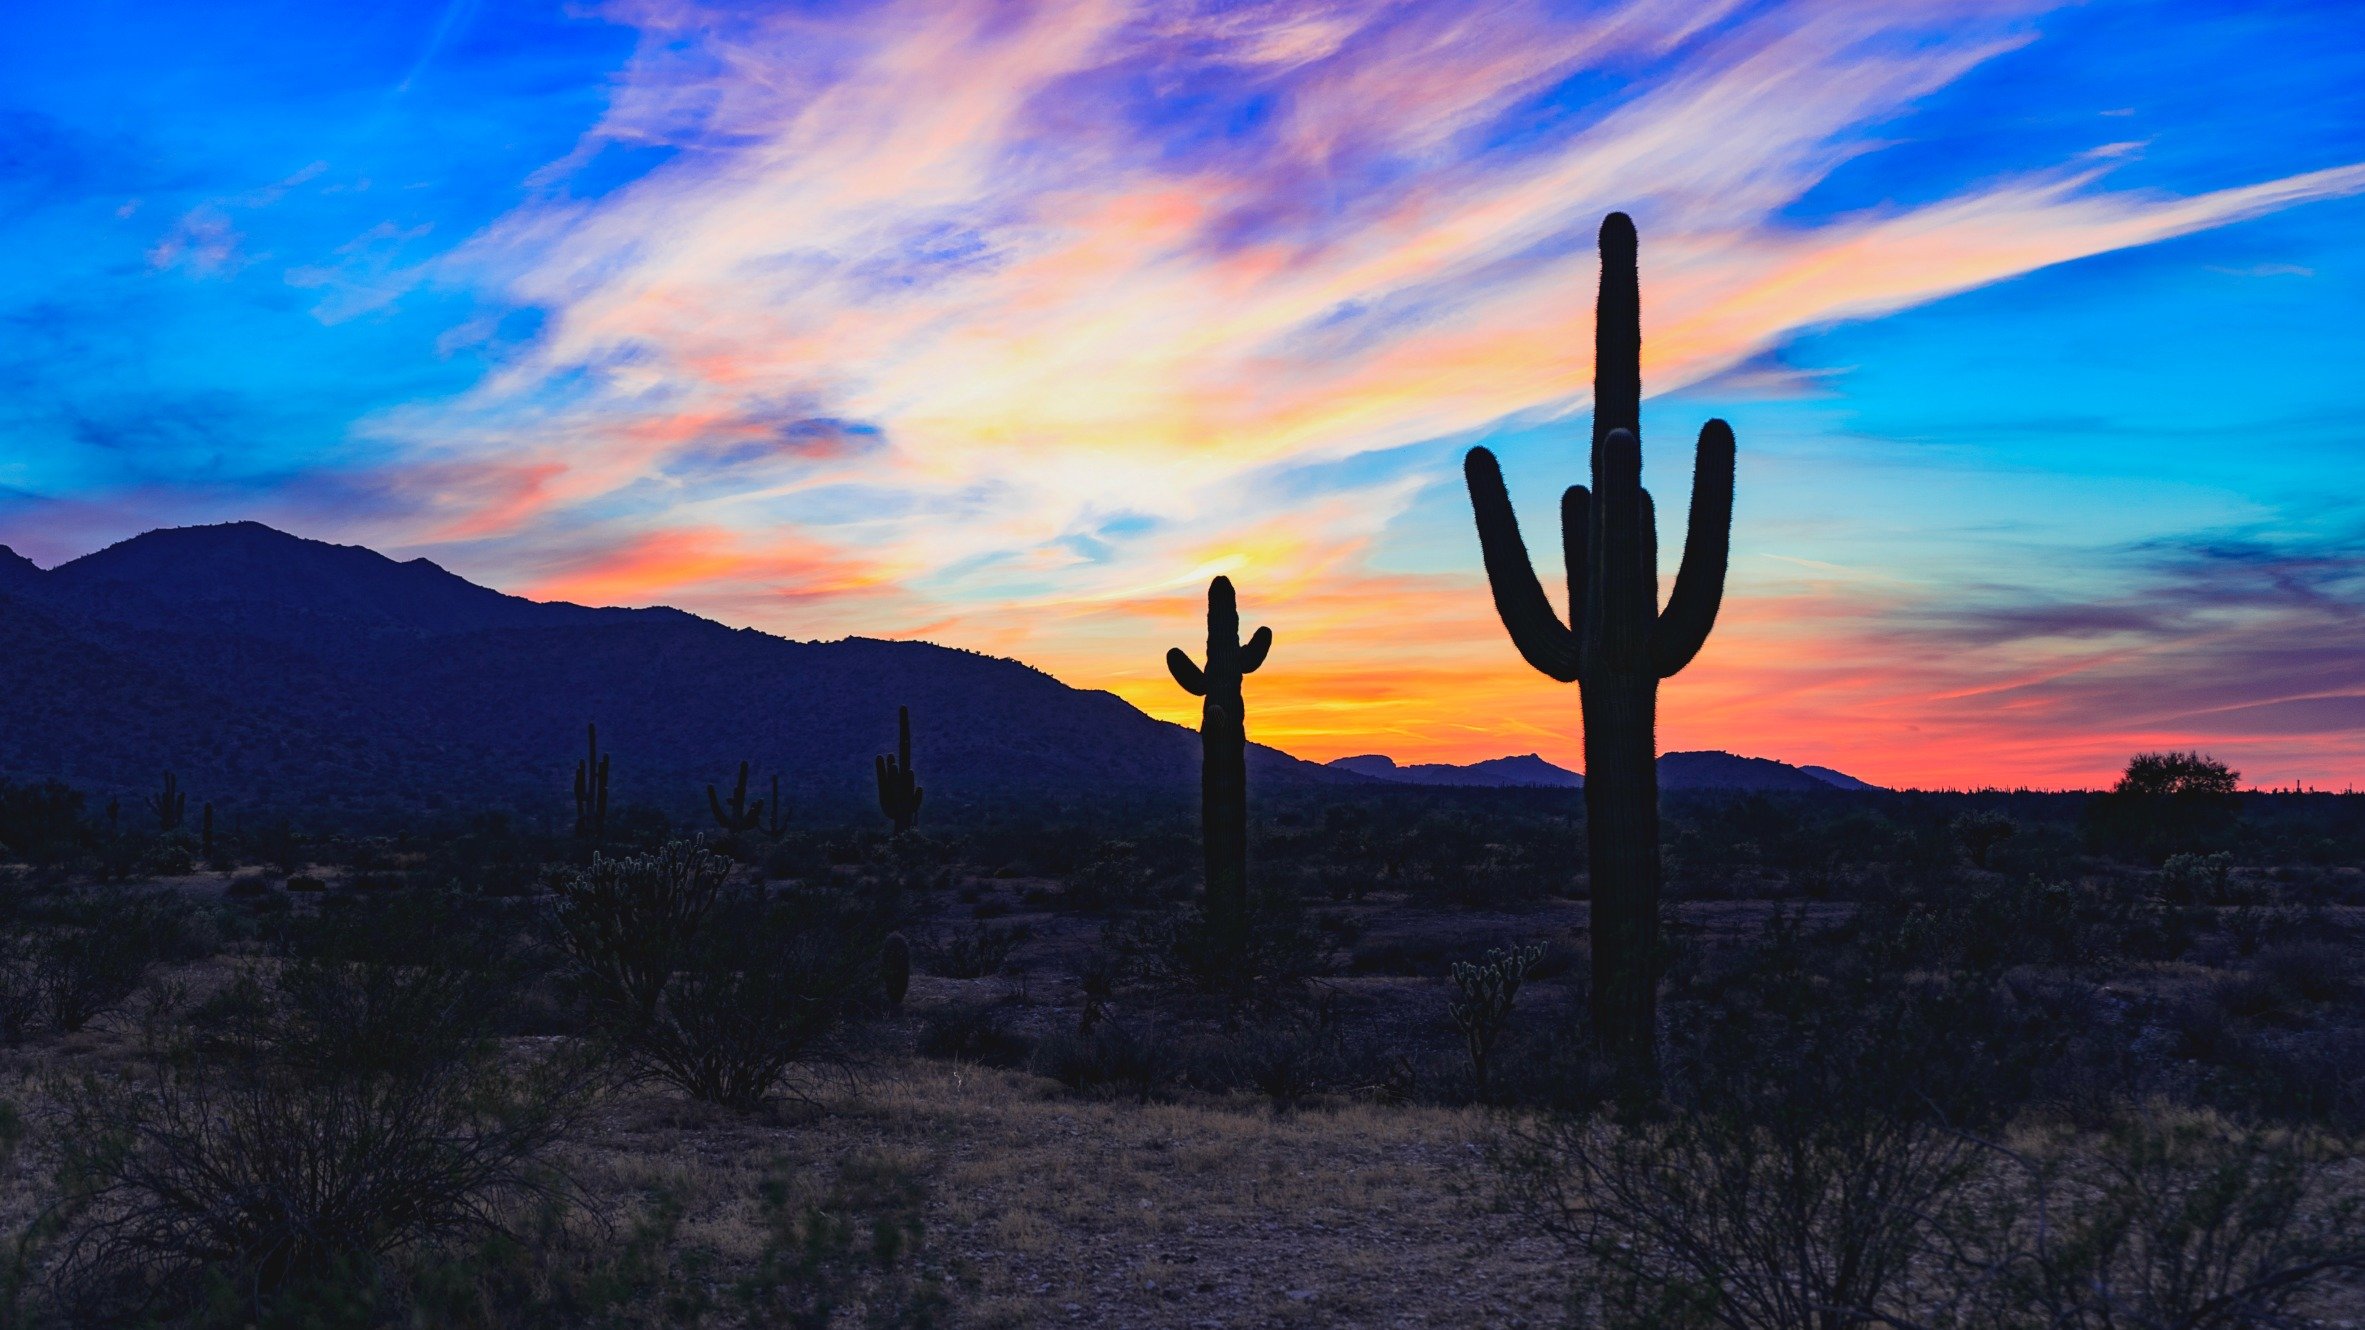 Valley of the Sun: A Self-Guided Road Trip Around Phoenix, Arizona